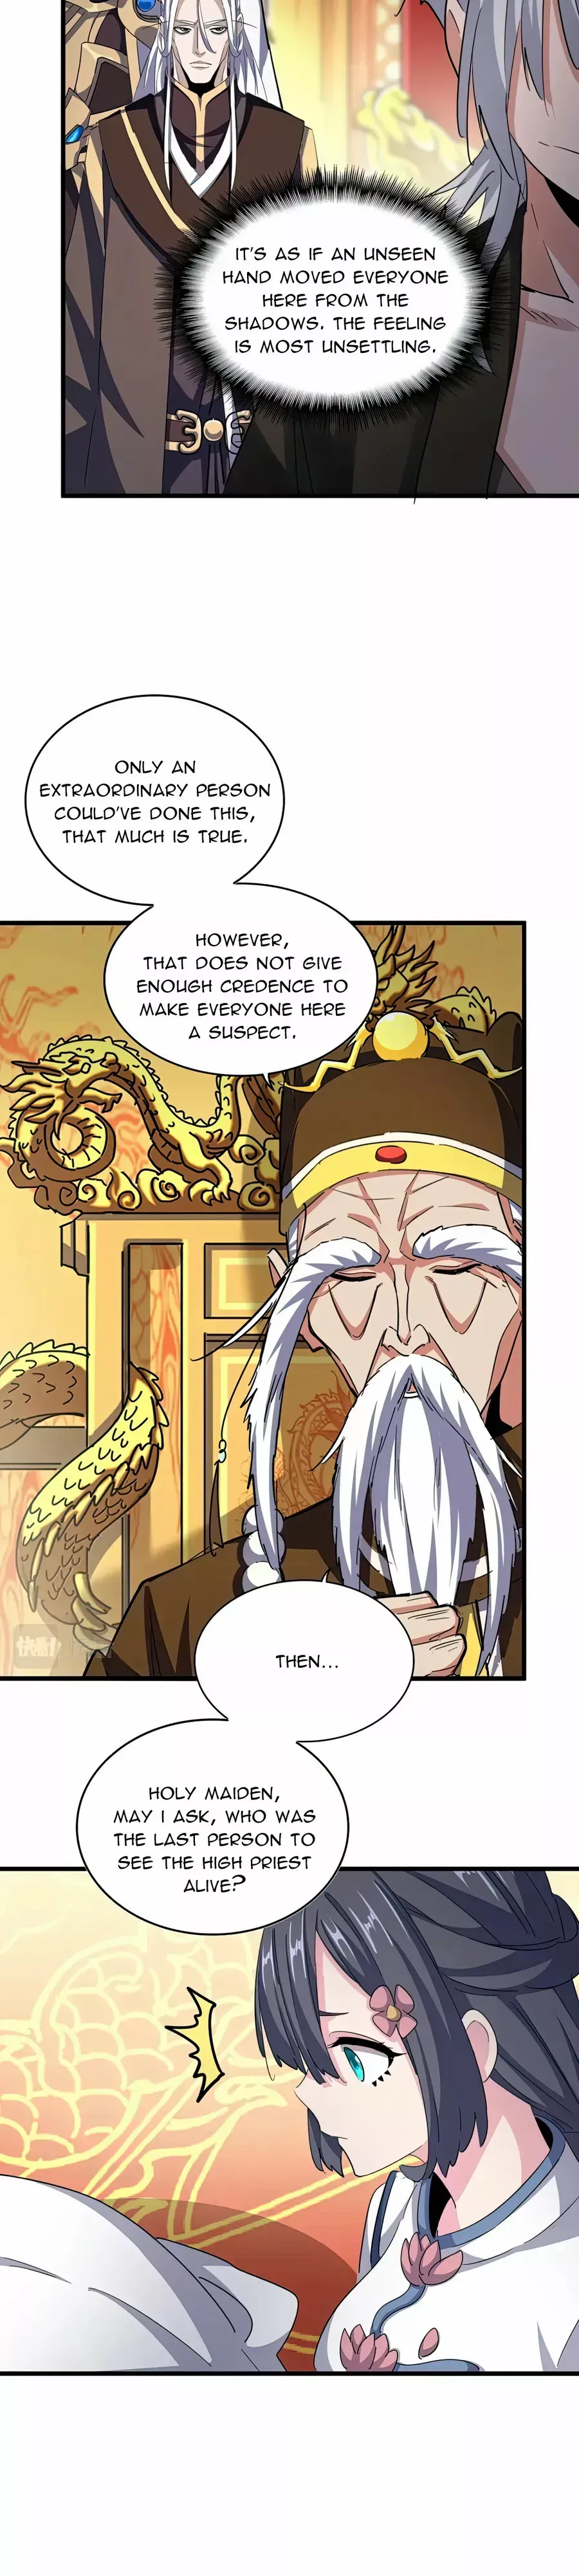 Magic Emperor Chapter 403 - Page 9